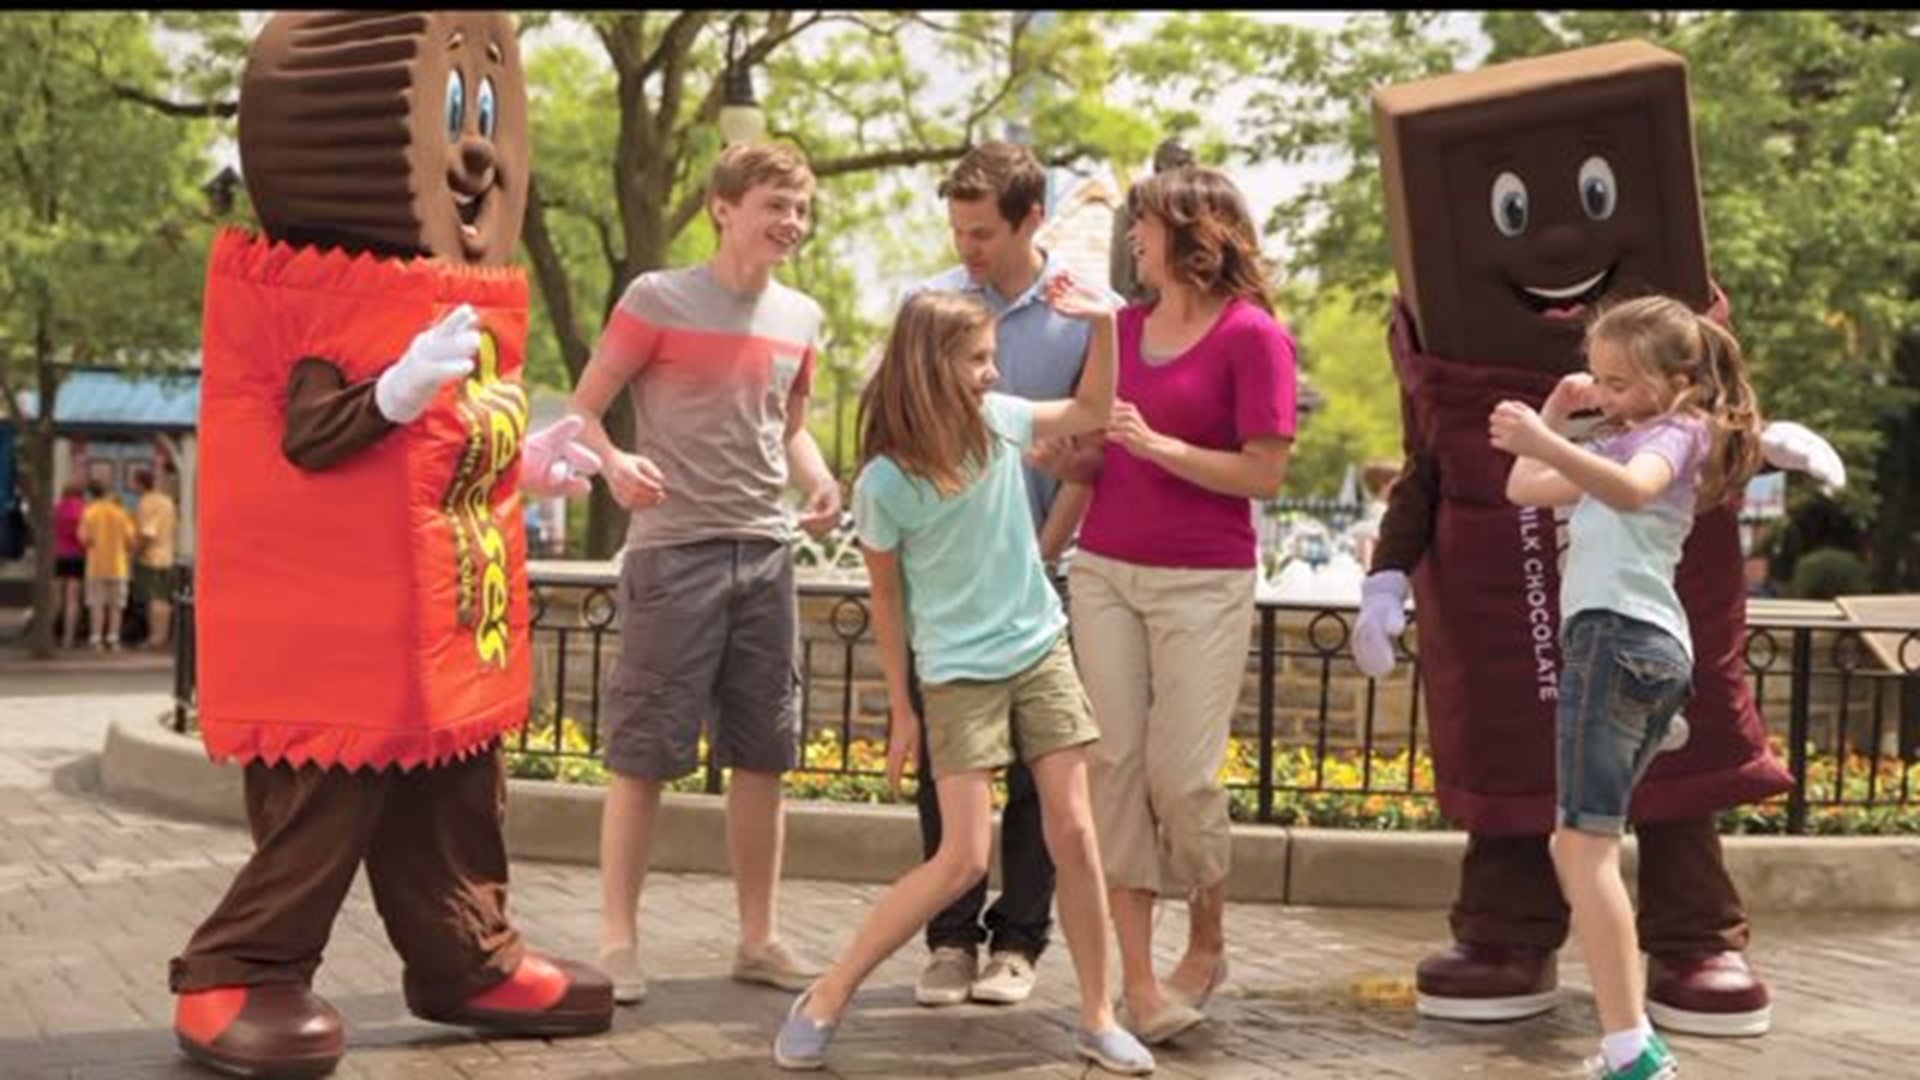 Hershey Happenings previews events for April